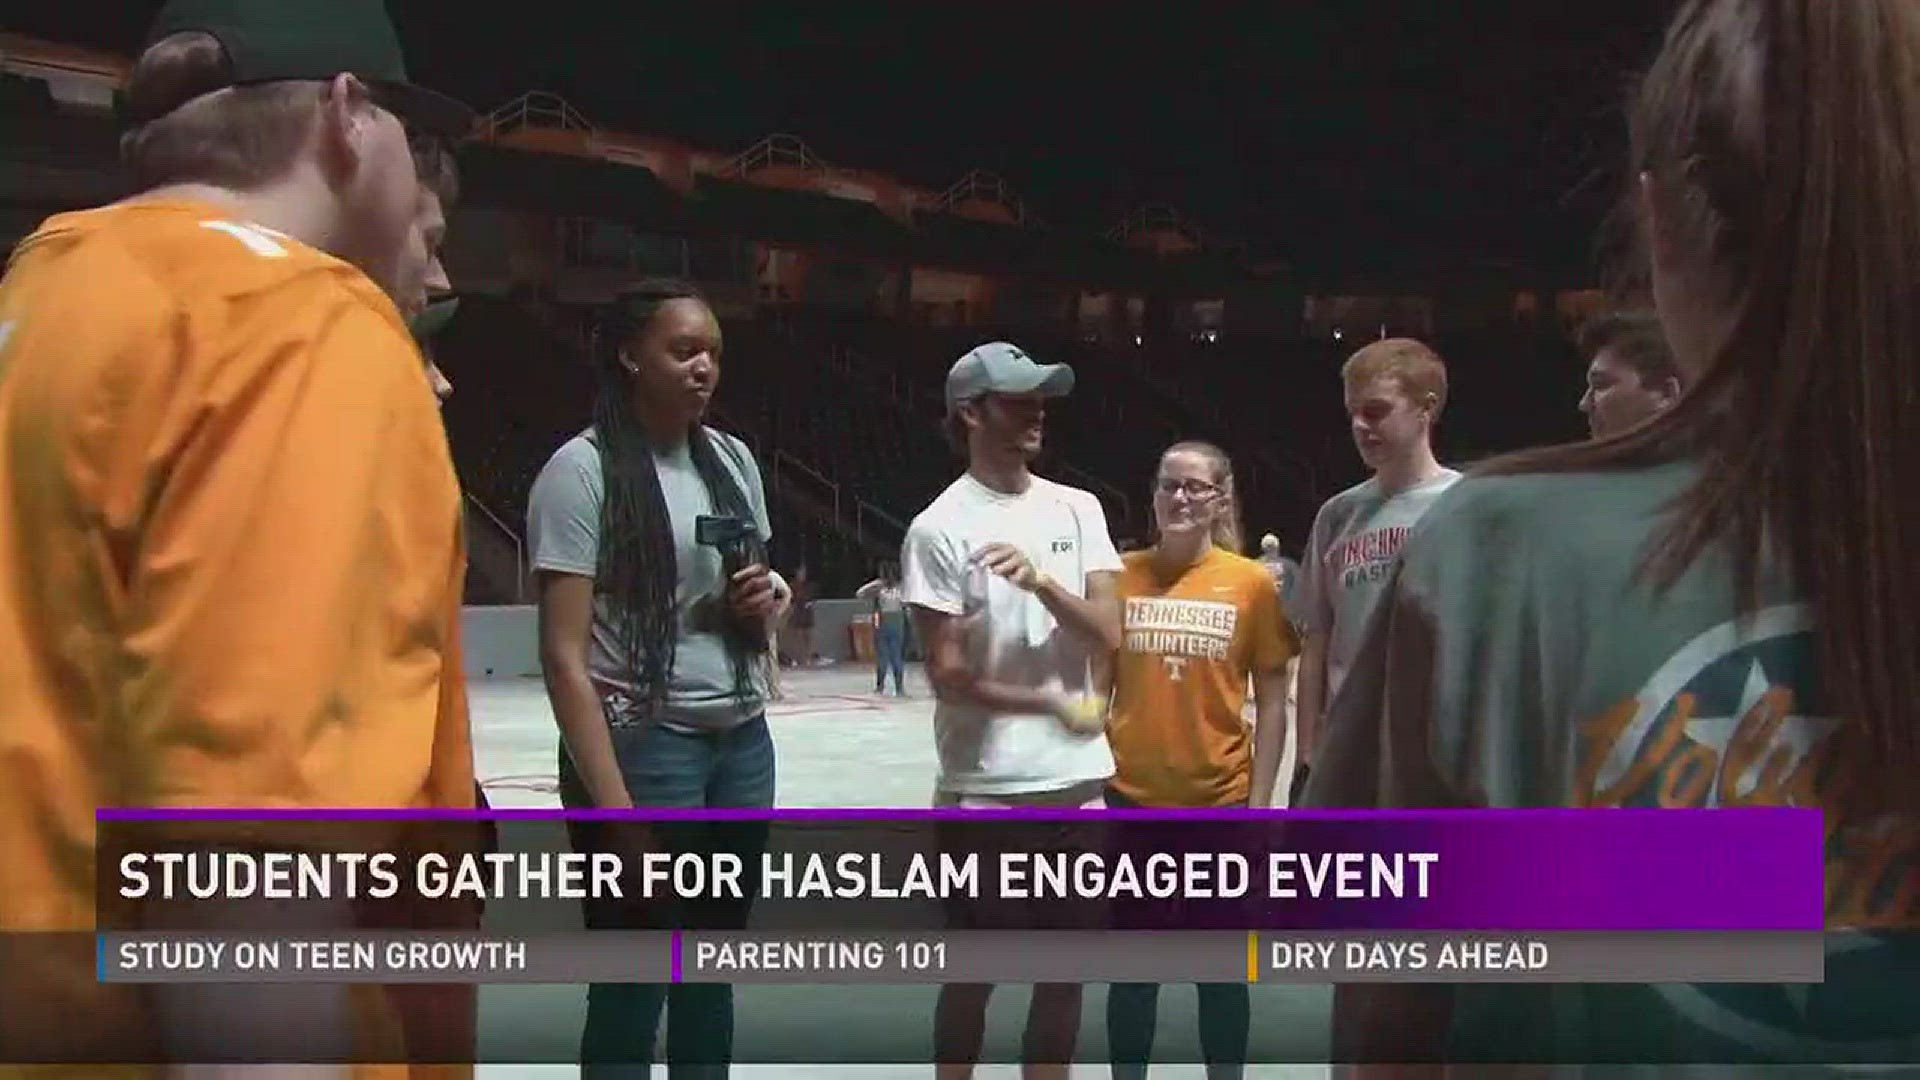 Sept. 19, 2017: Nearly a 1,000 first-year UT business students gathered for the second annual Haslam Engaged event.